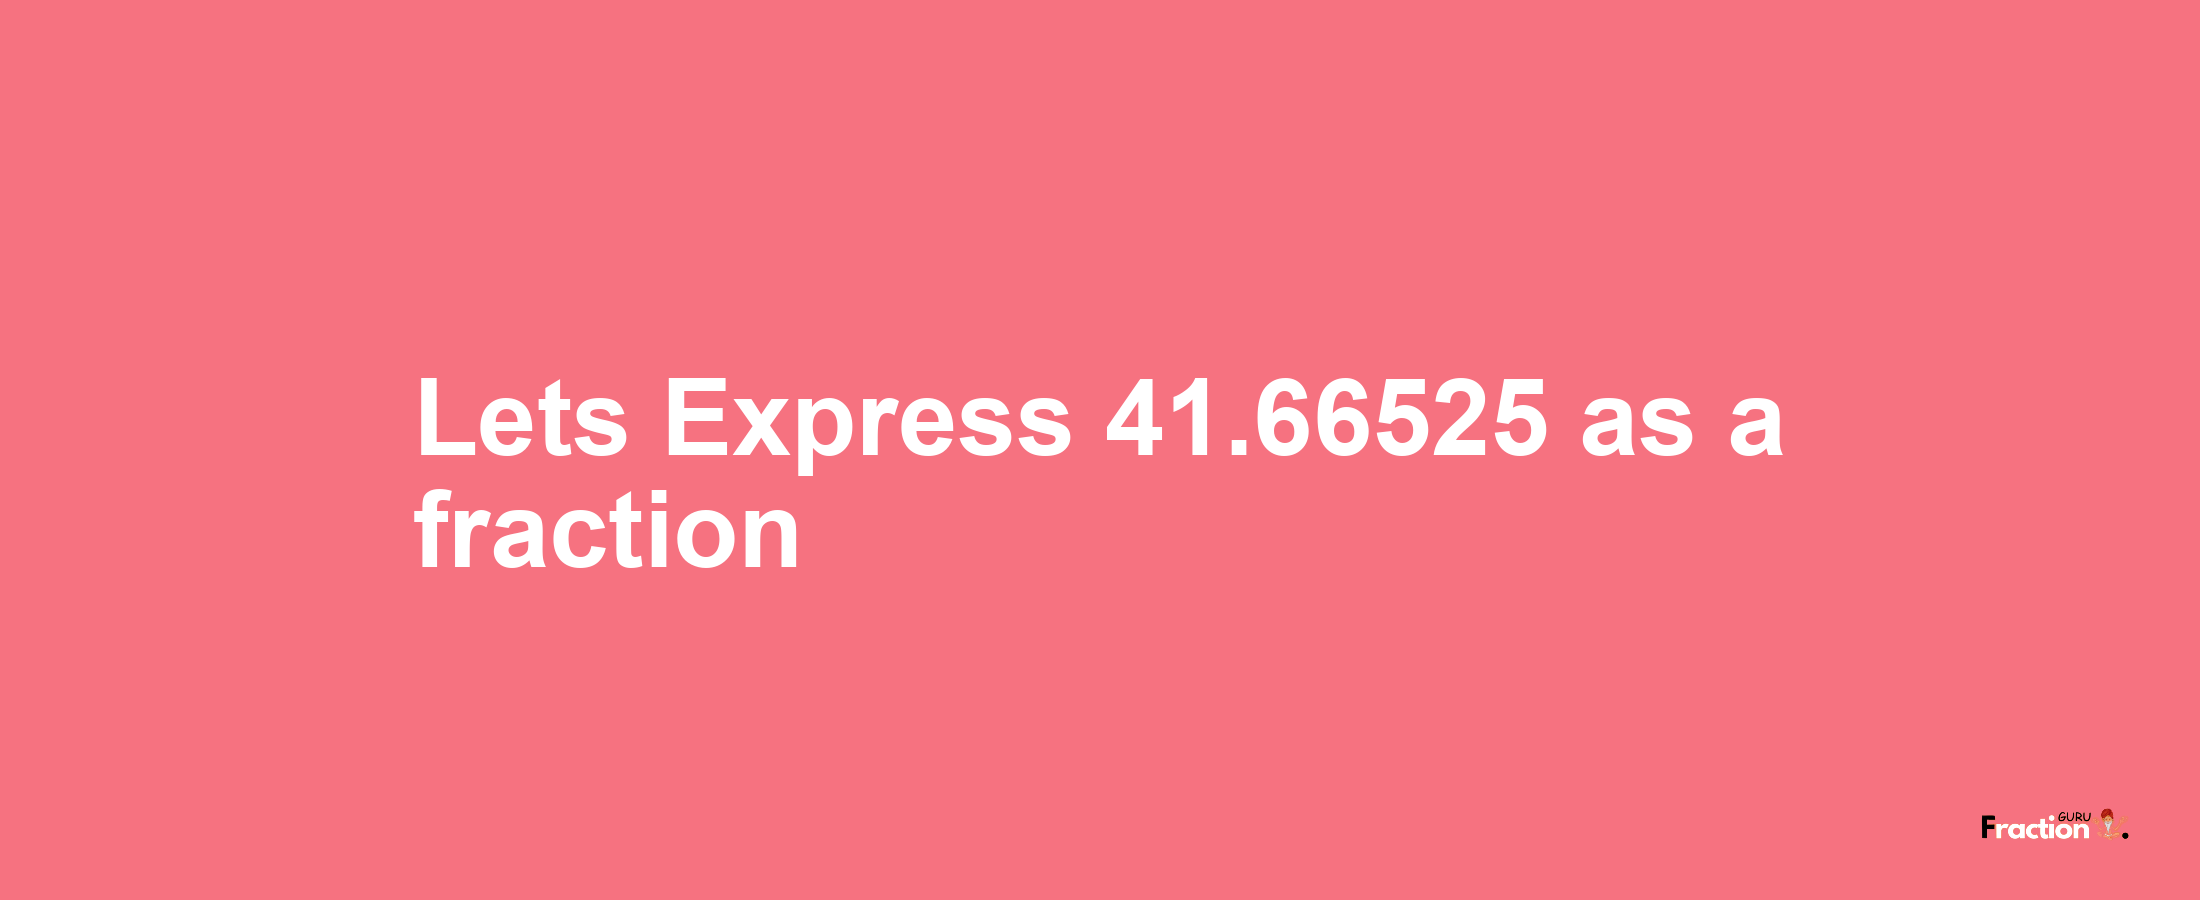 Lets Express 41.66525 as afraction